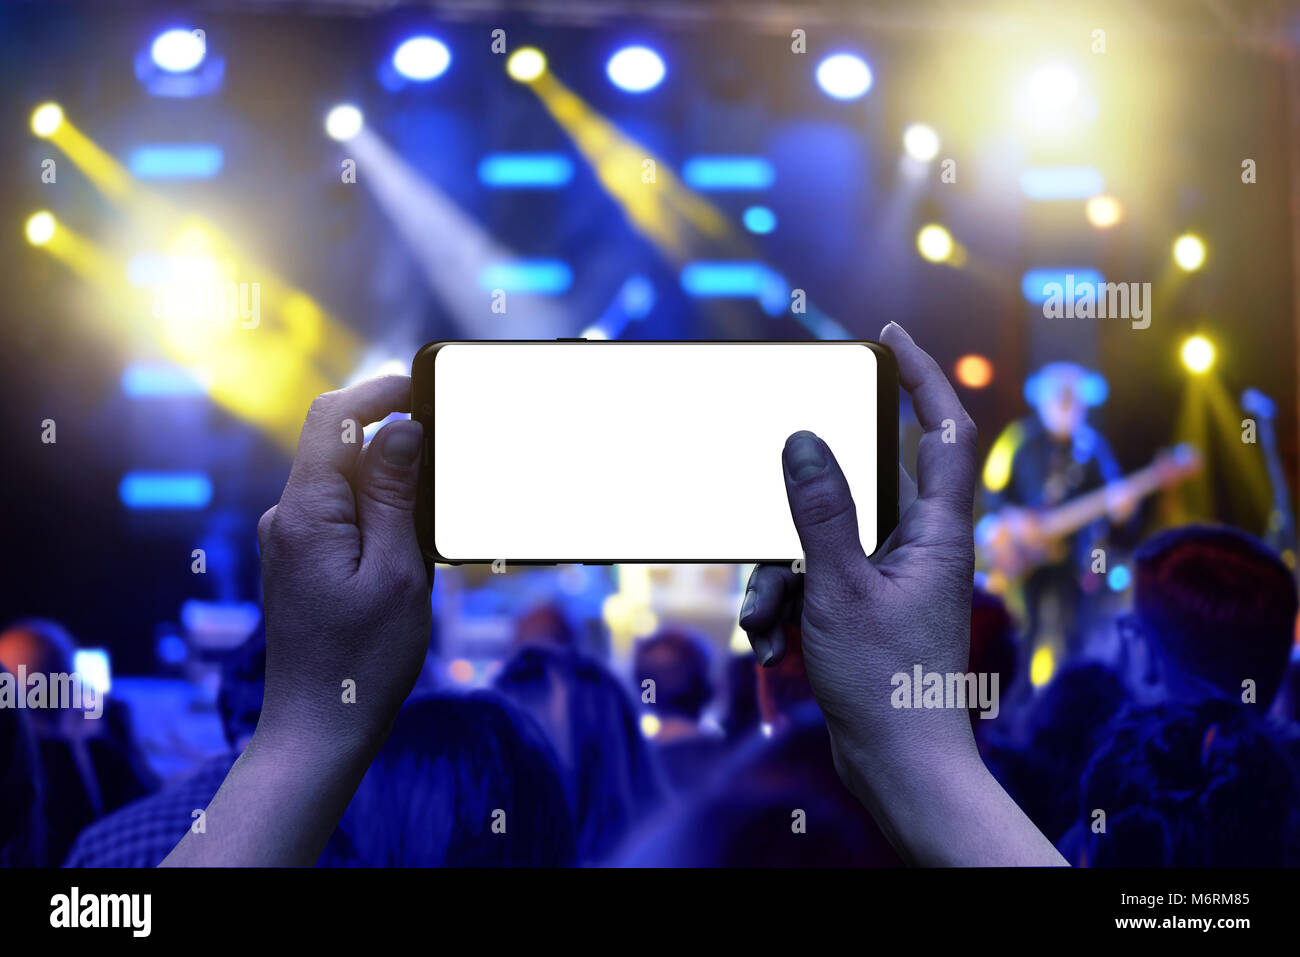 Mobile phone with isolated display in hands. Horizontal position. Live music concert in background. Crowd and lights. Stock Photo